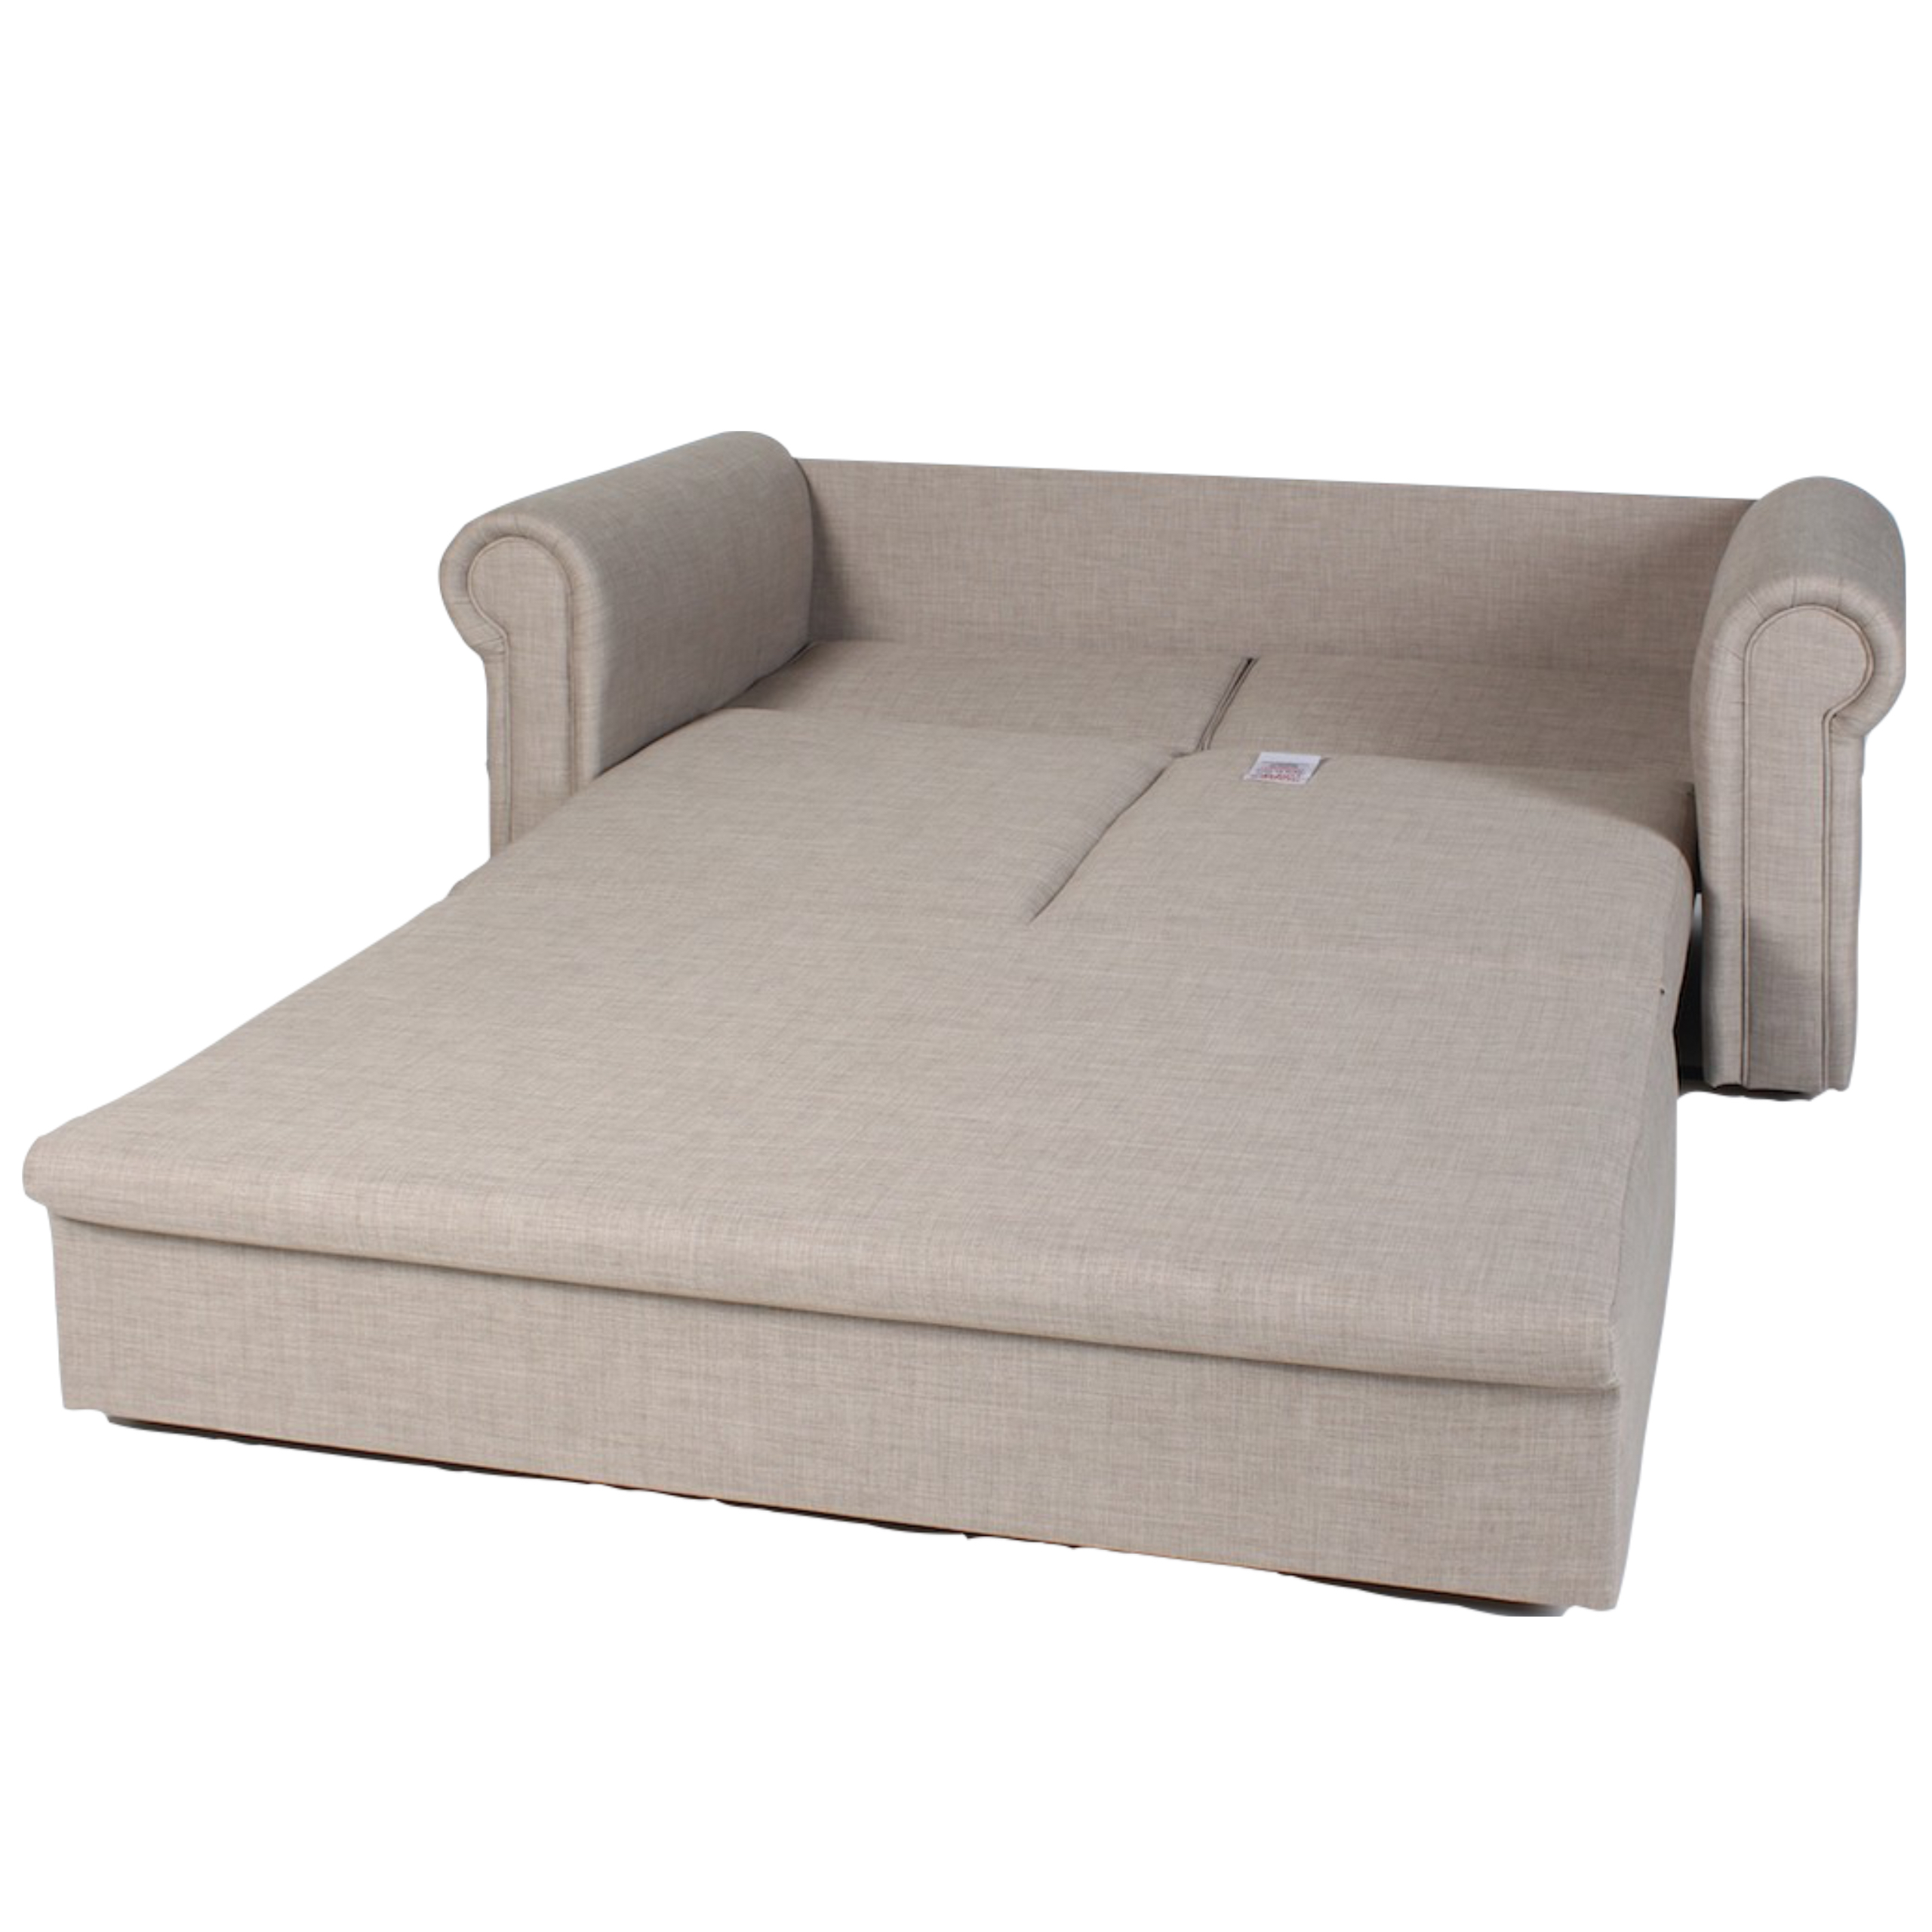 Sleeper couch in lasting, durable fabric - The Bedroom Shop Online